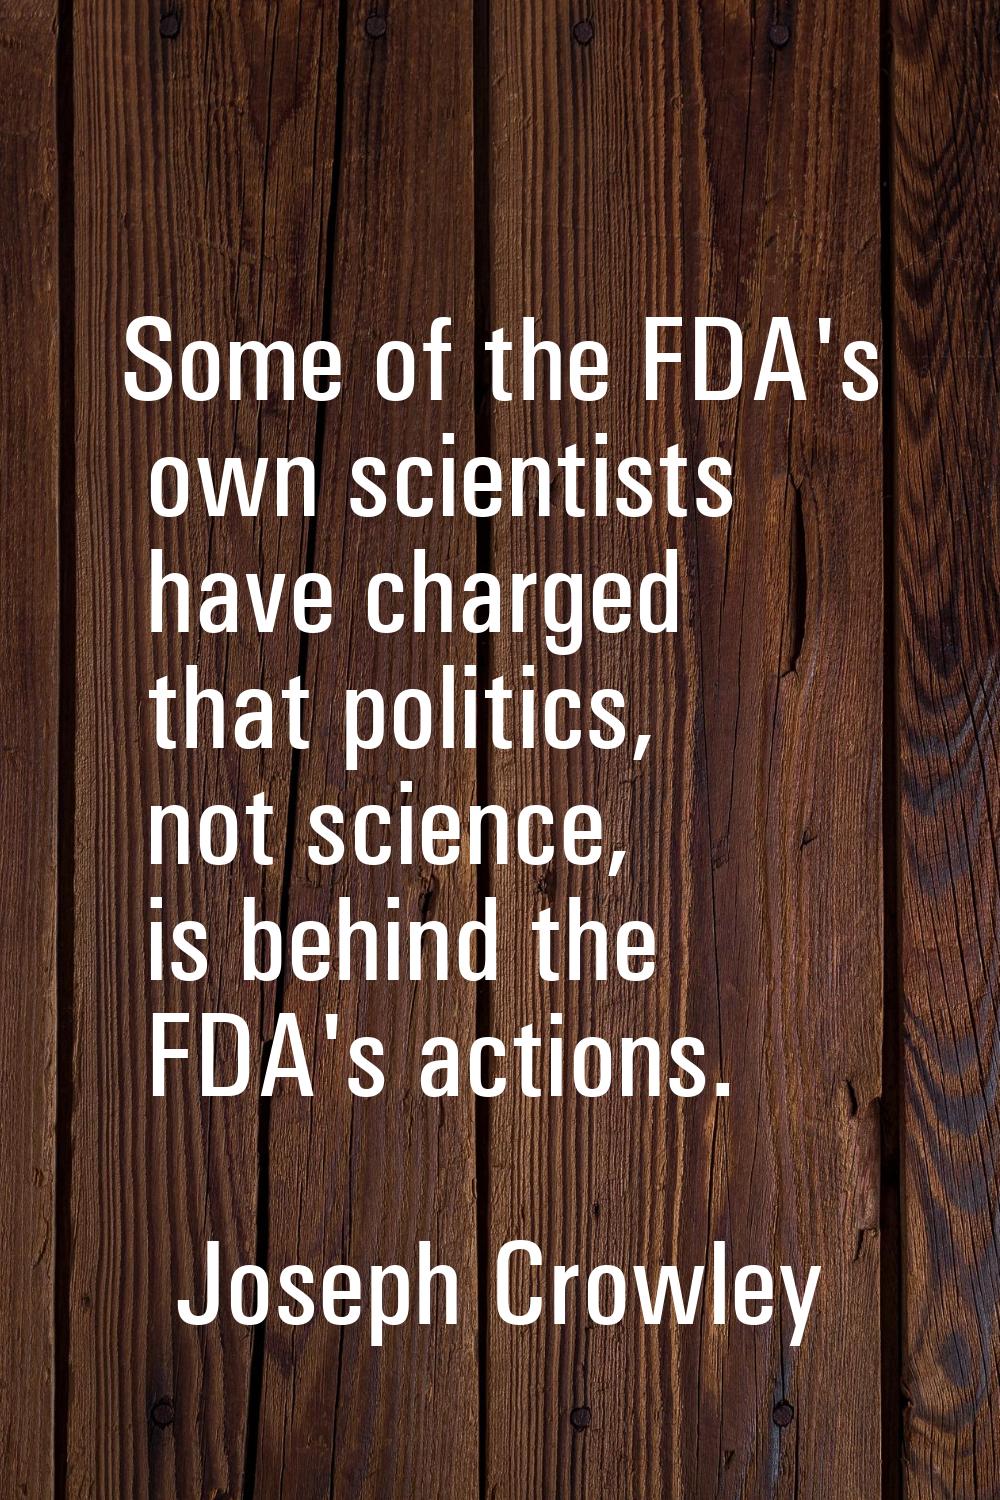 Some of the FDA's own scientists have charged that politics, not science, is behind the FDA's actio